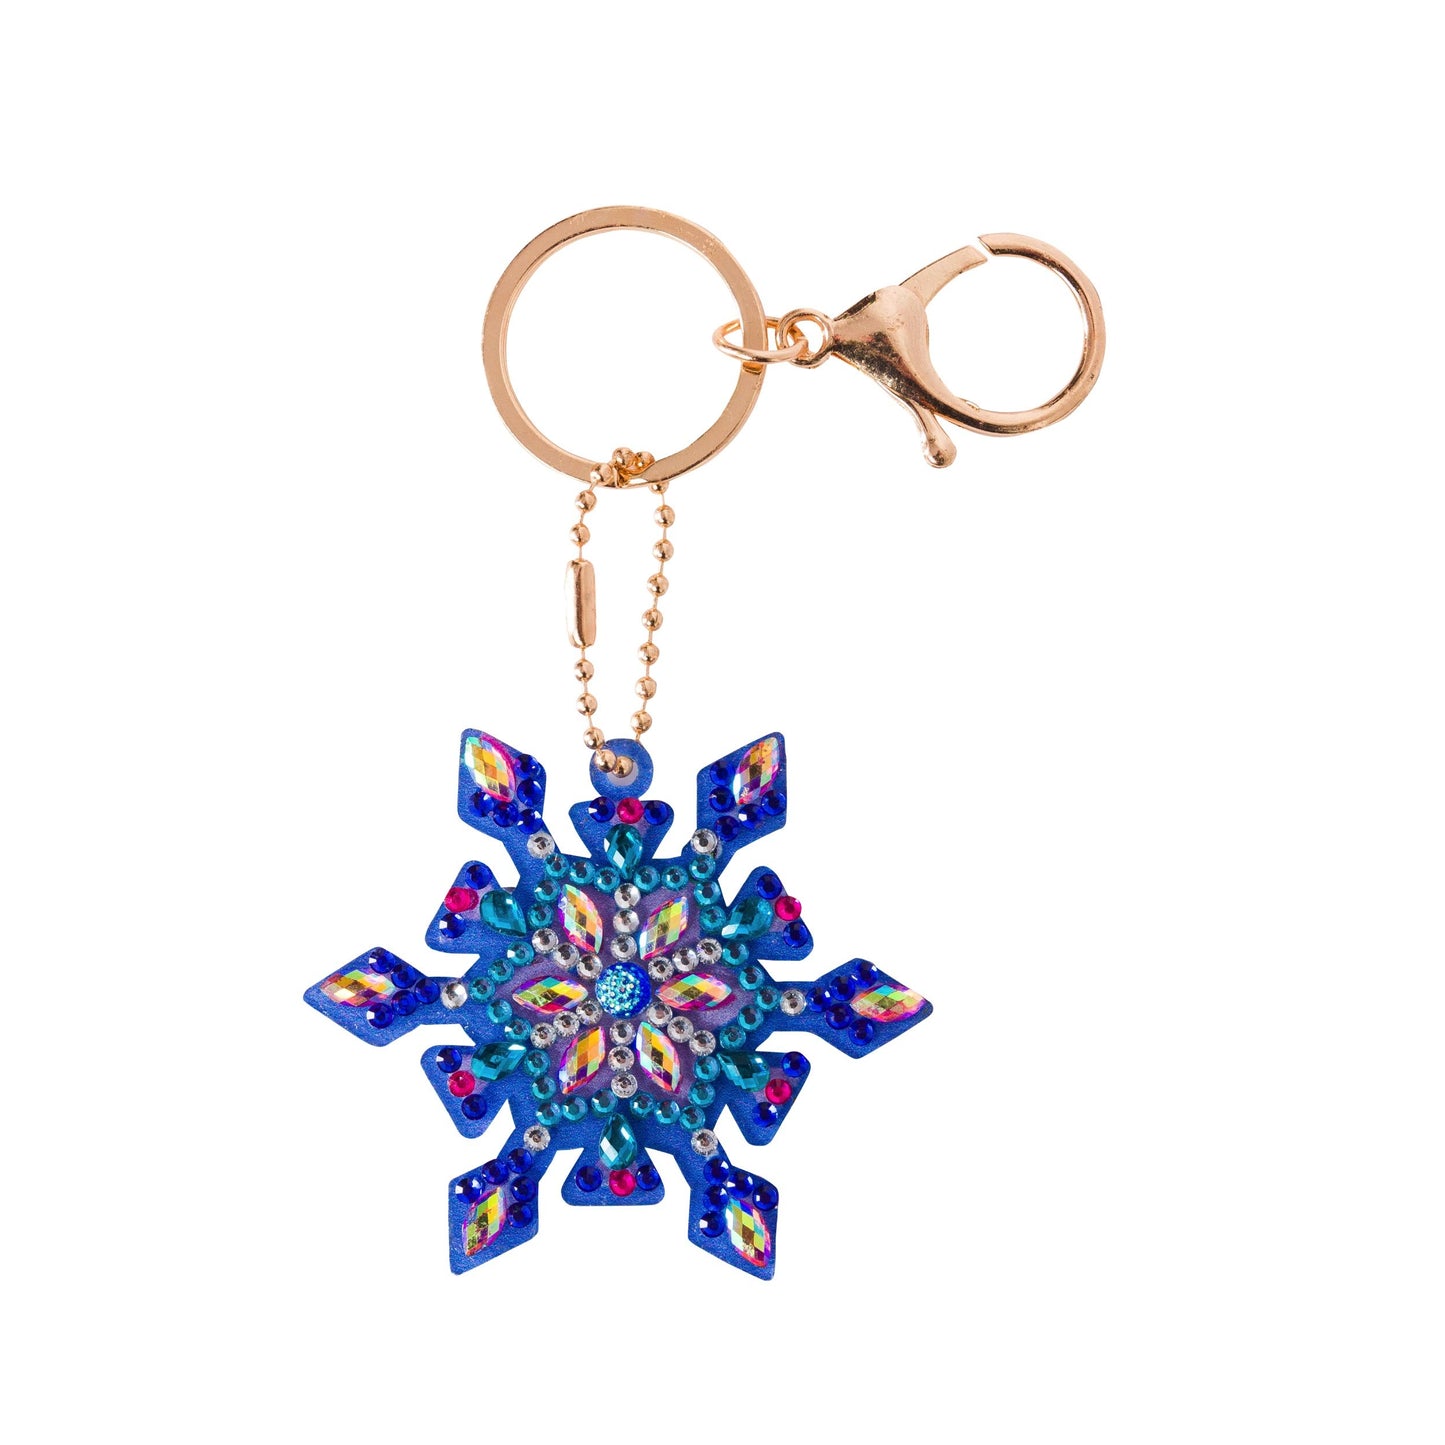 Set of 8 Crystal Art Key Rings Keychains - "Festive Collection"